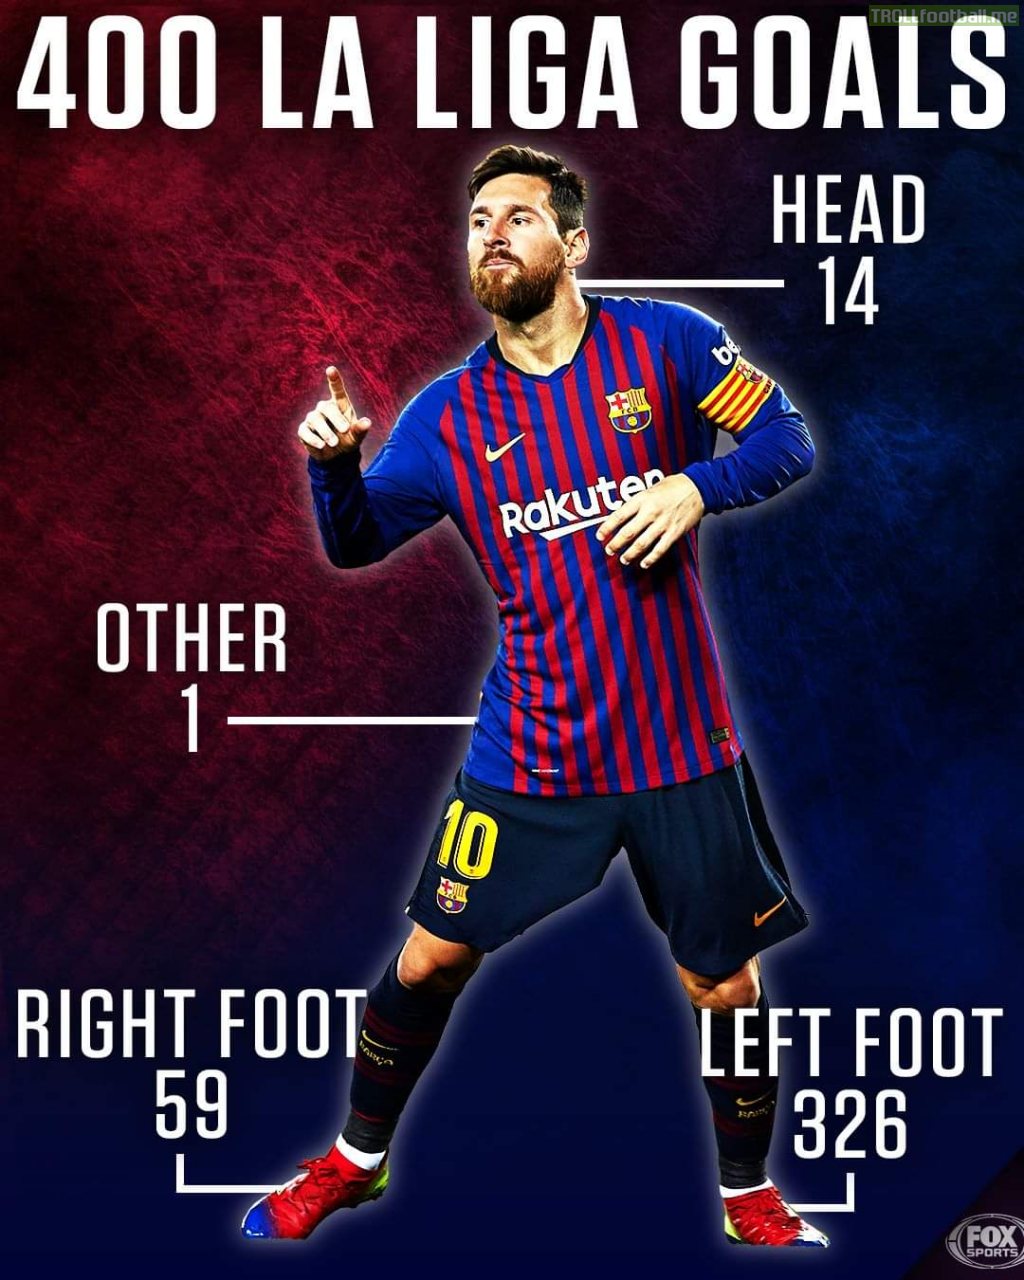 A breakdown of Messi's 400 La Liga goals. The majority have come from his left foot.